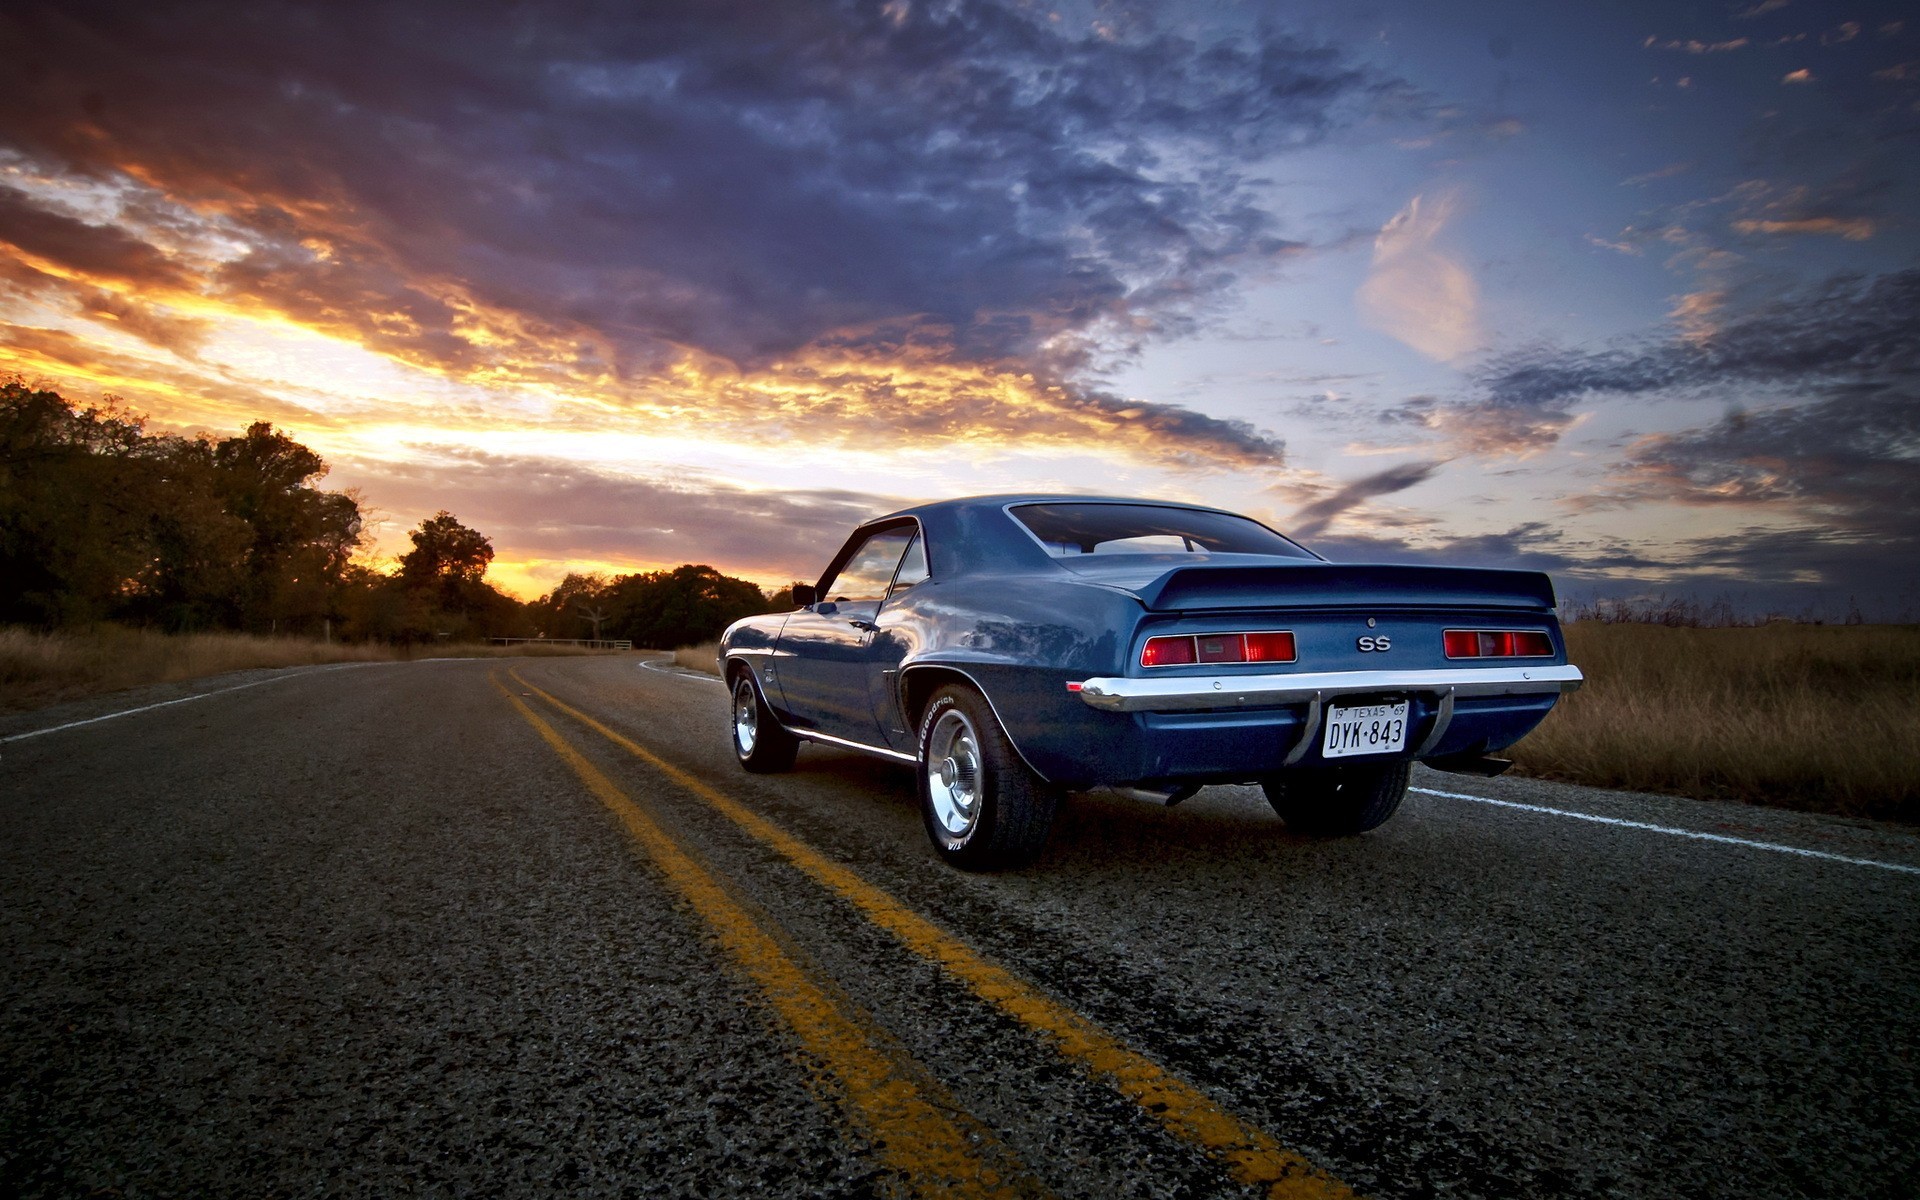 1920x1200 ... High Resolution Car Images Best Of Muscle Car Camaro Wallpapers High  Quality 1920x1080 ...